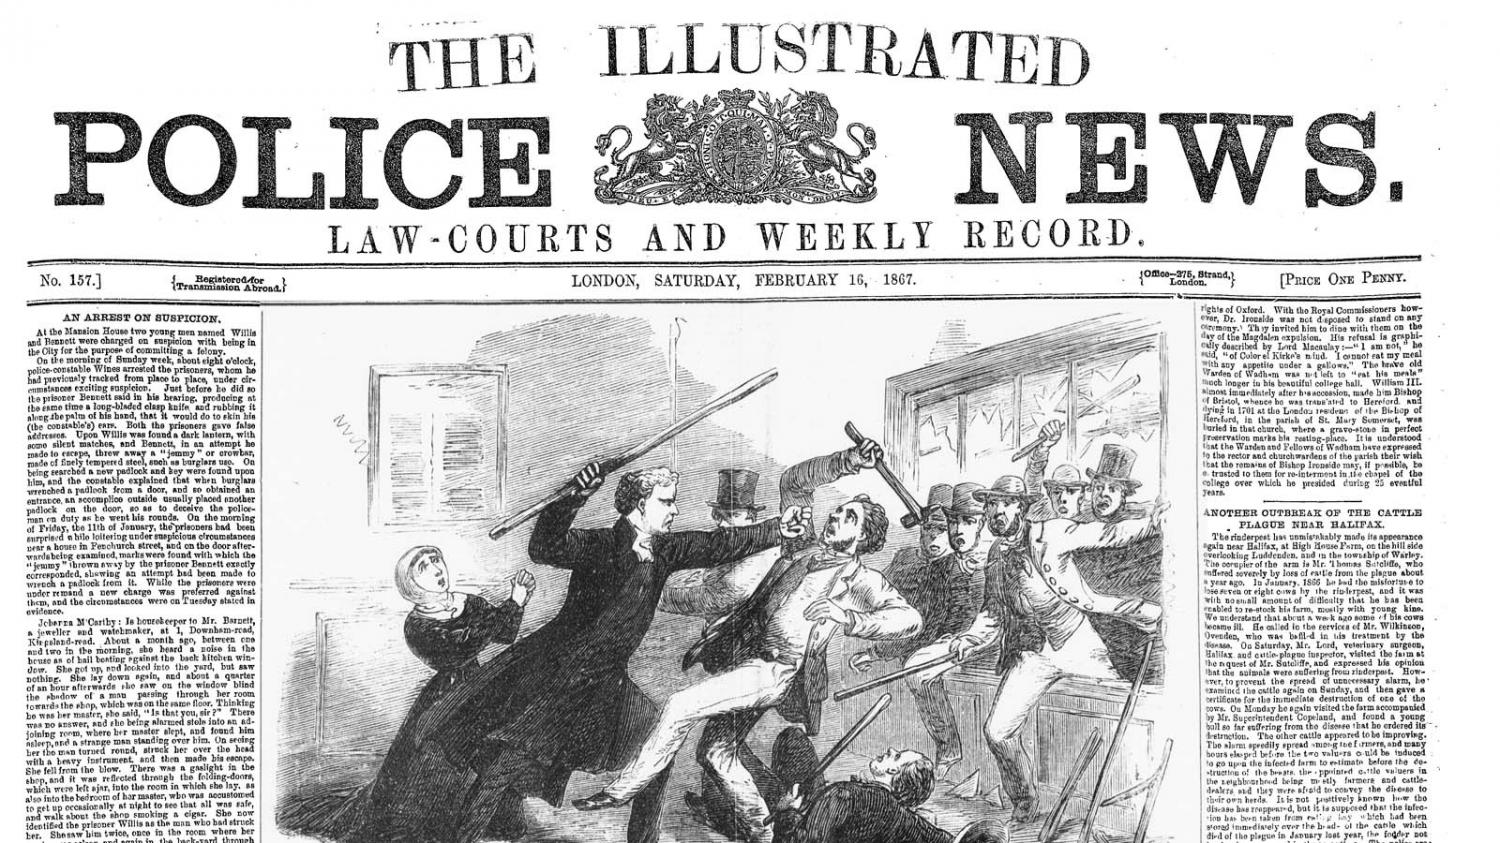 Vintage newspaper header, "The Illustrated Police News," featuring a dramatic illustration, likely depicting a historical event, surrounded by densely packed text.